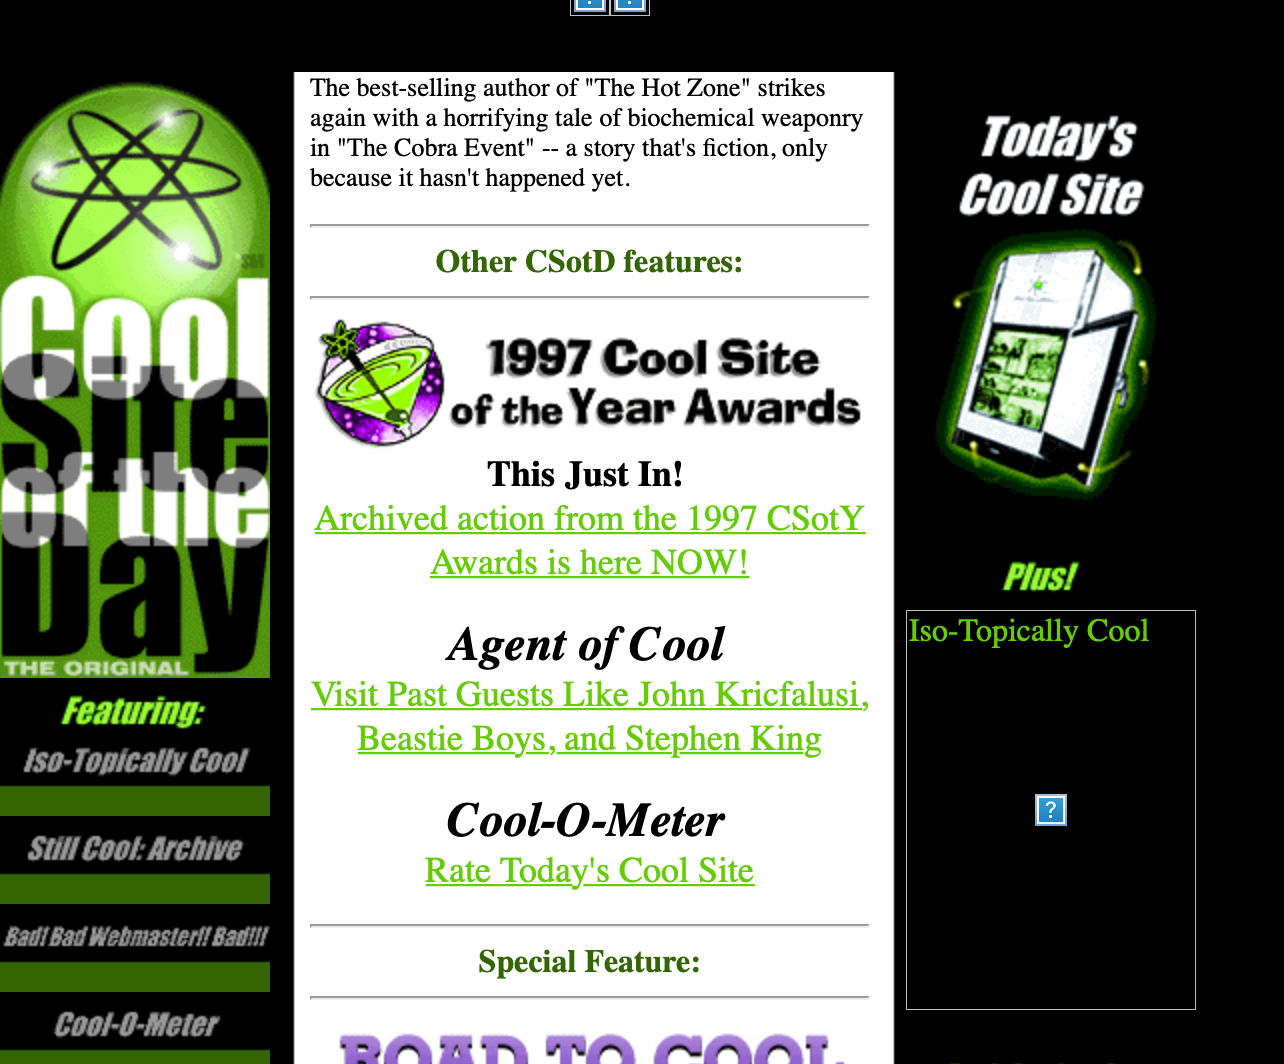 Glenn Davis’ “Cool Site of the Day” had a similar vibe and tone of the Useless Pages